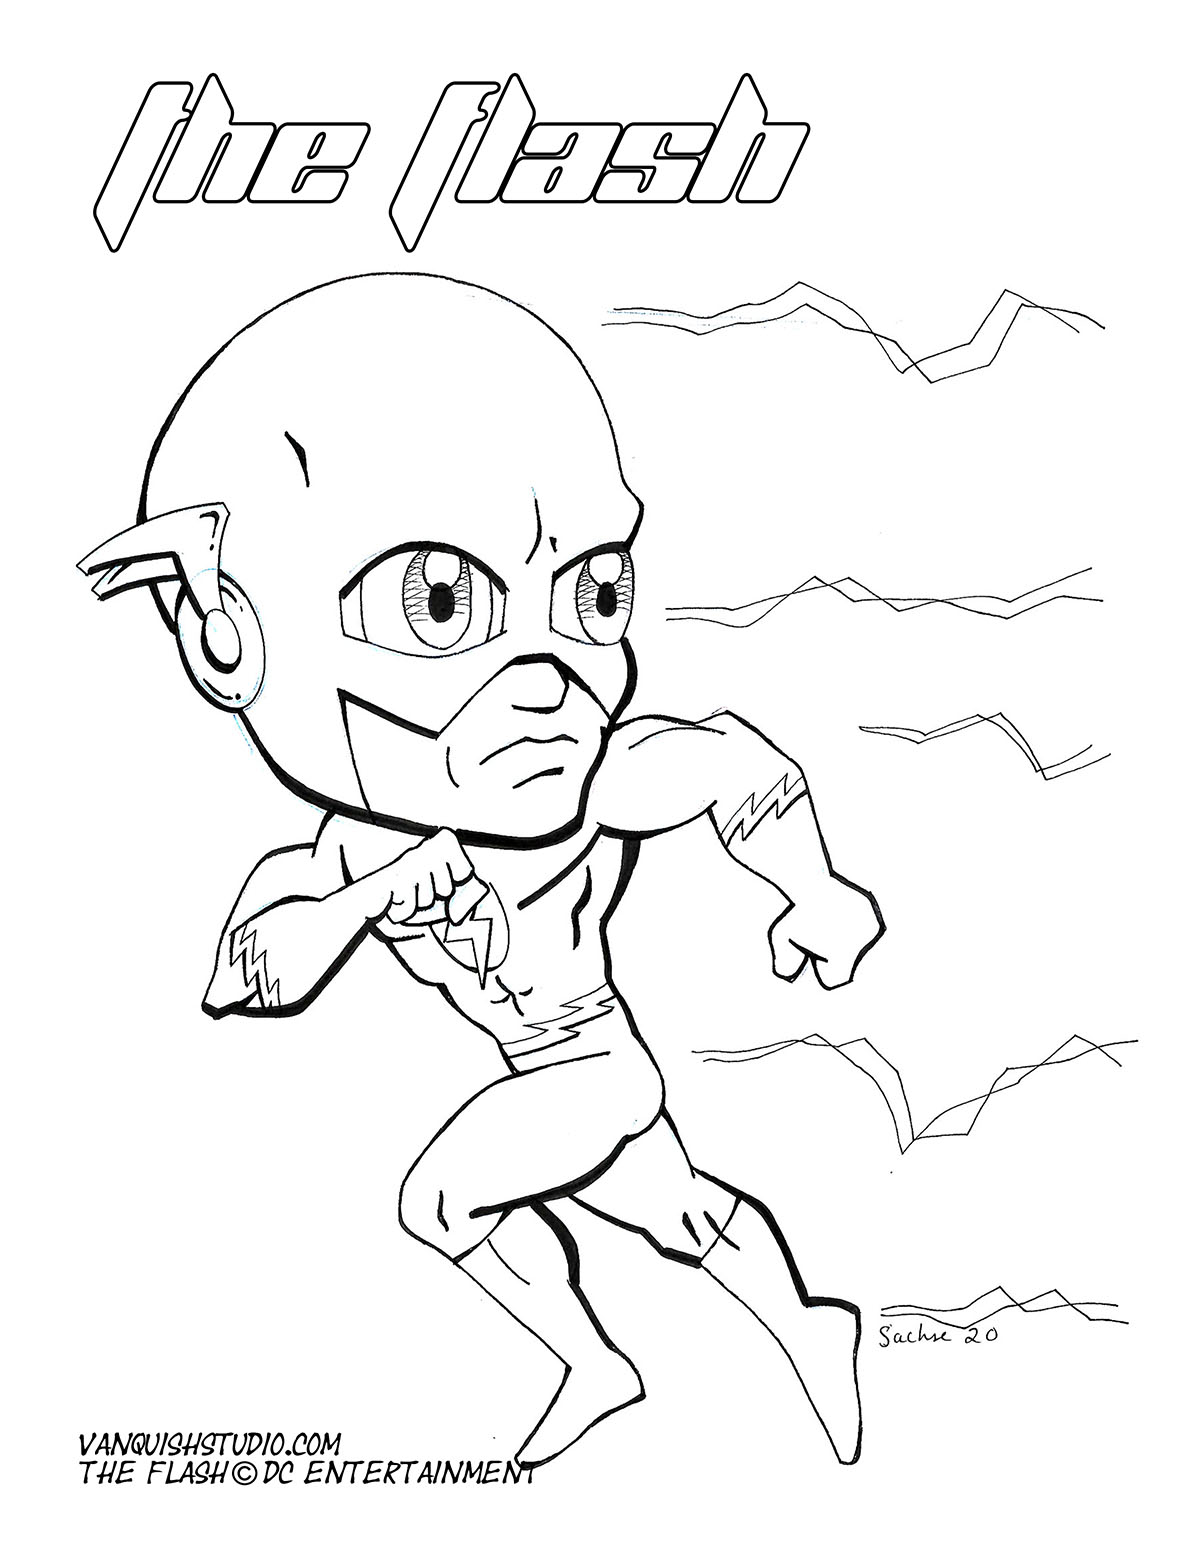 Flash2 Coloring page